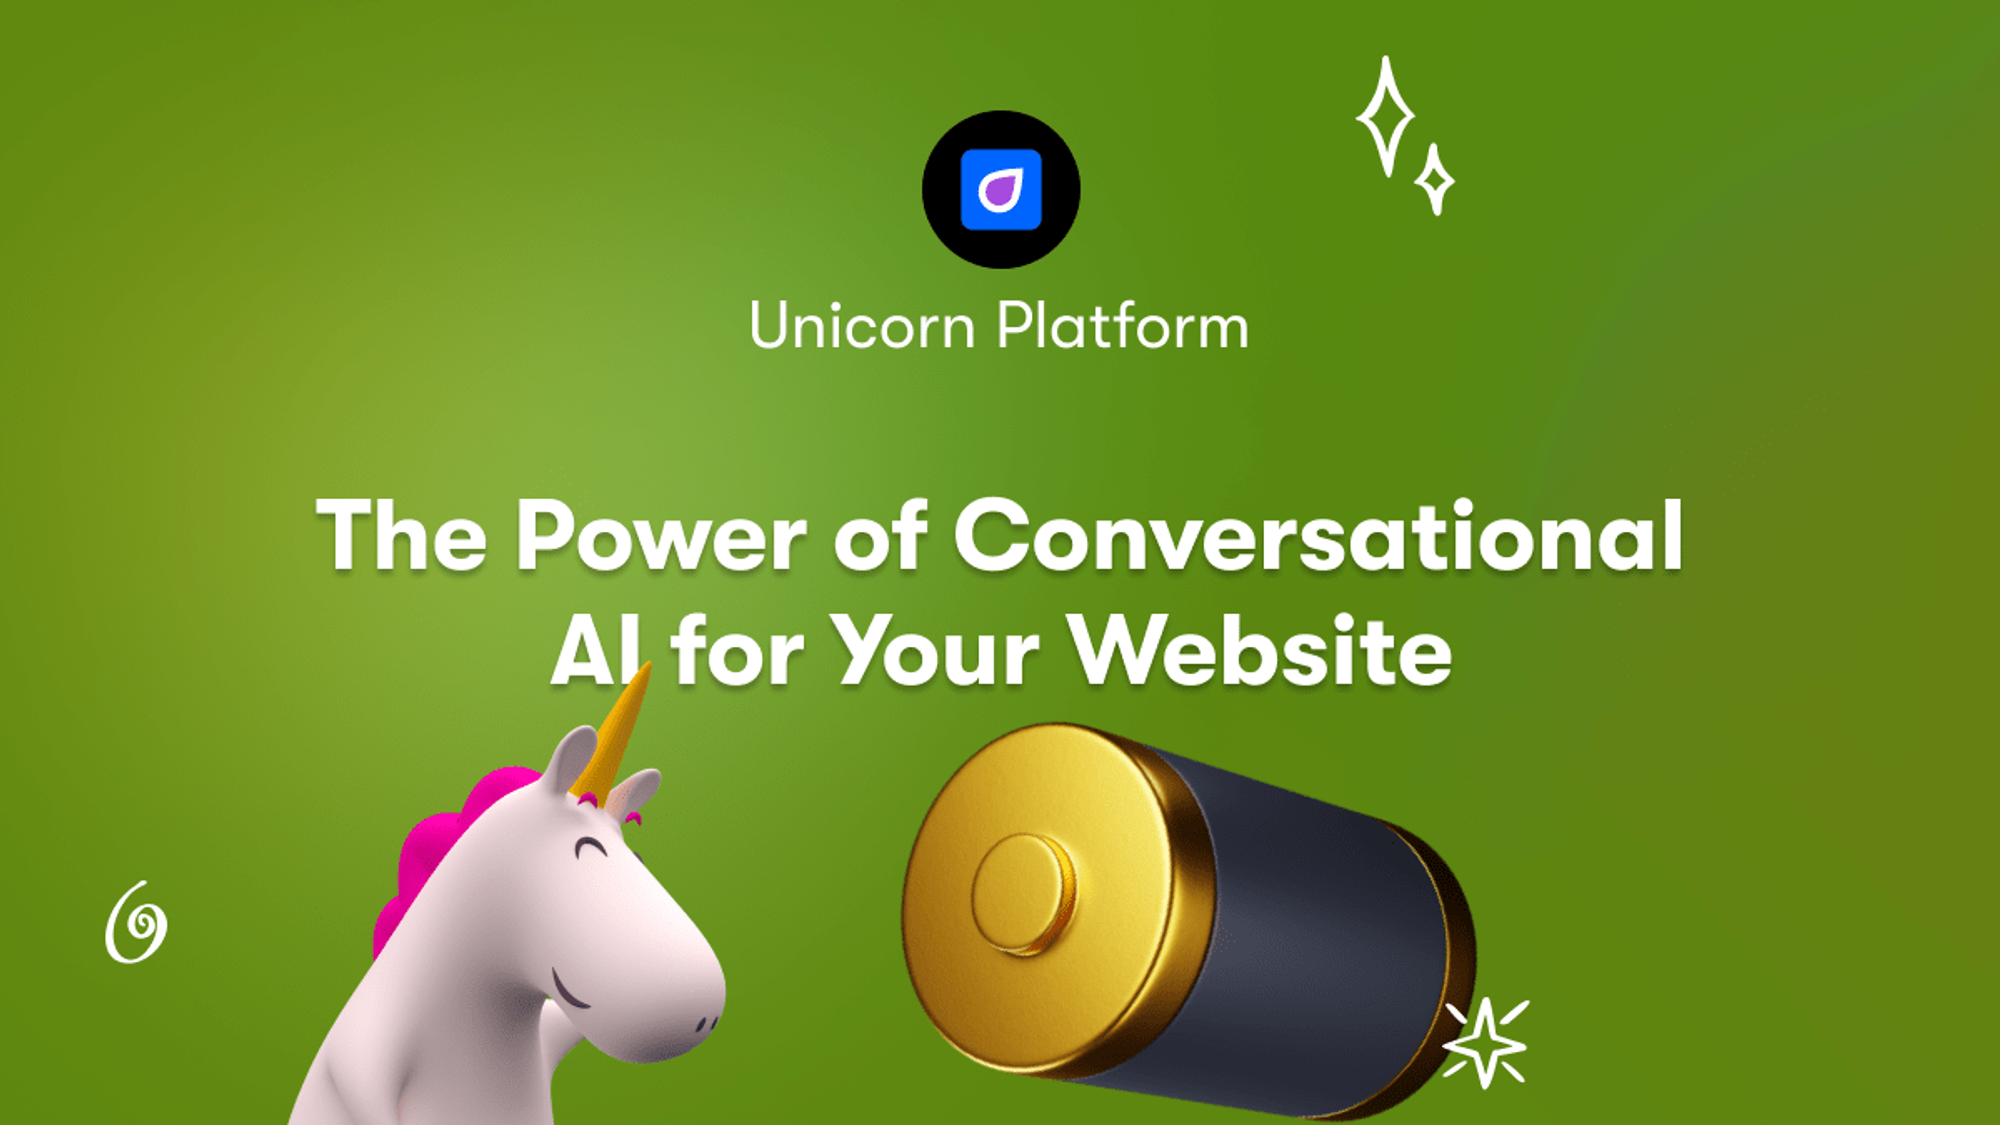 The Power of Conversational AI for Your Website